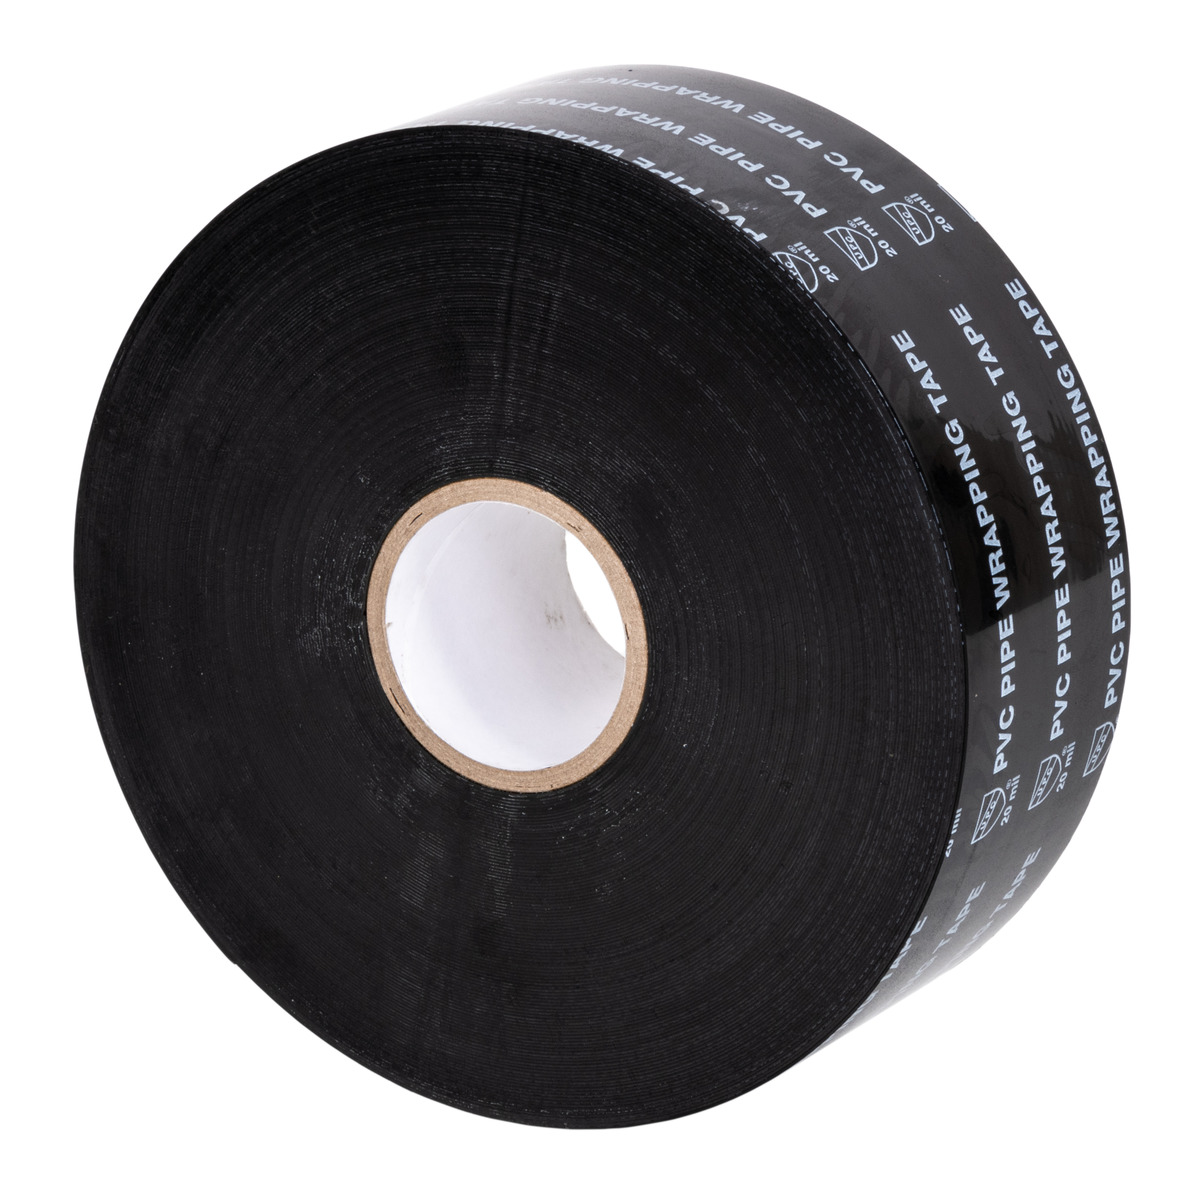 3M Scotchrap All-Weather Corrosion Protection Tape 50, 2 in x 100 ft